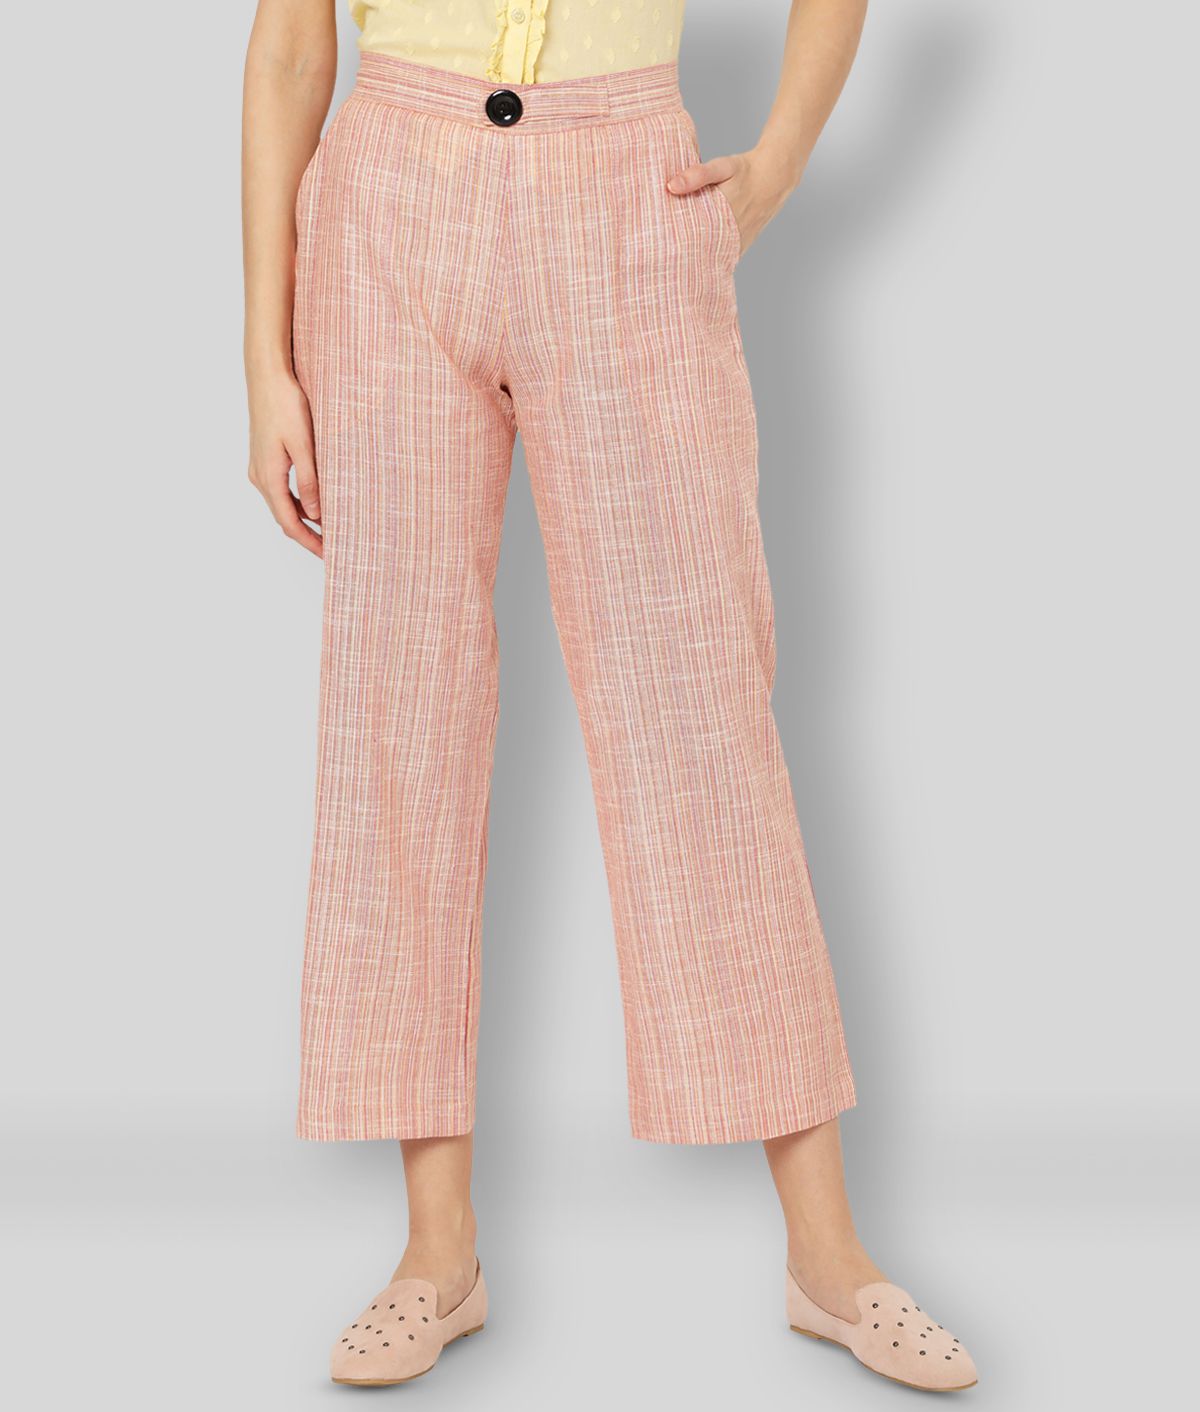 Smarty Pants - Pink Cotton Flared Fit Women's Formal Pants  ( Pack of 1 )